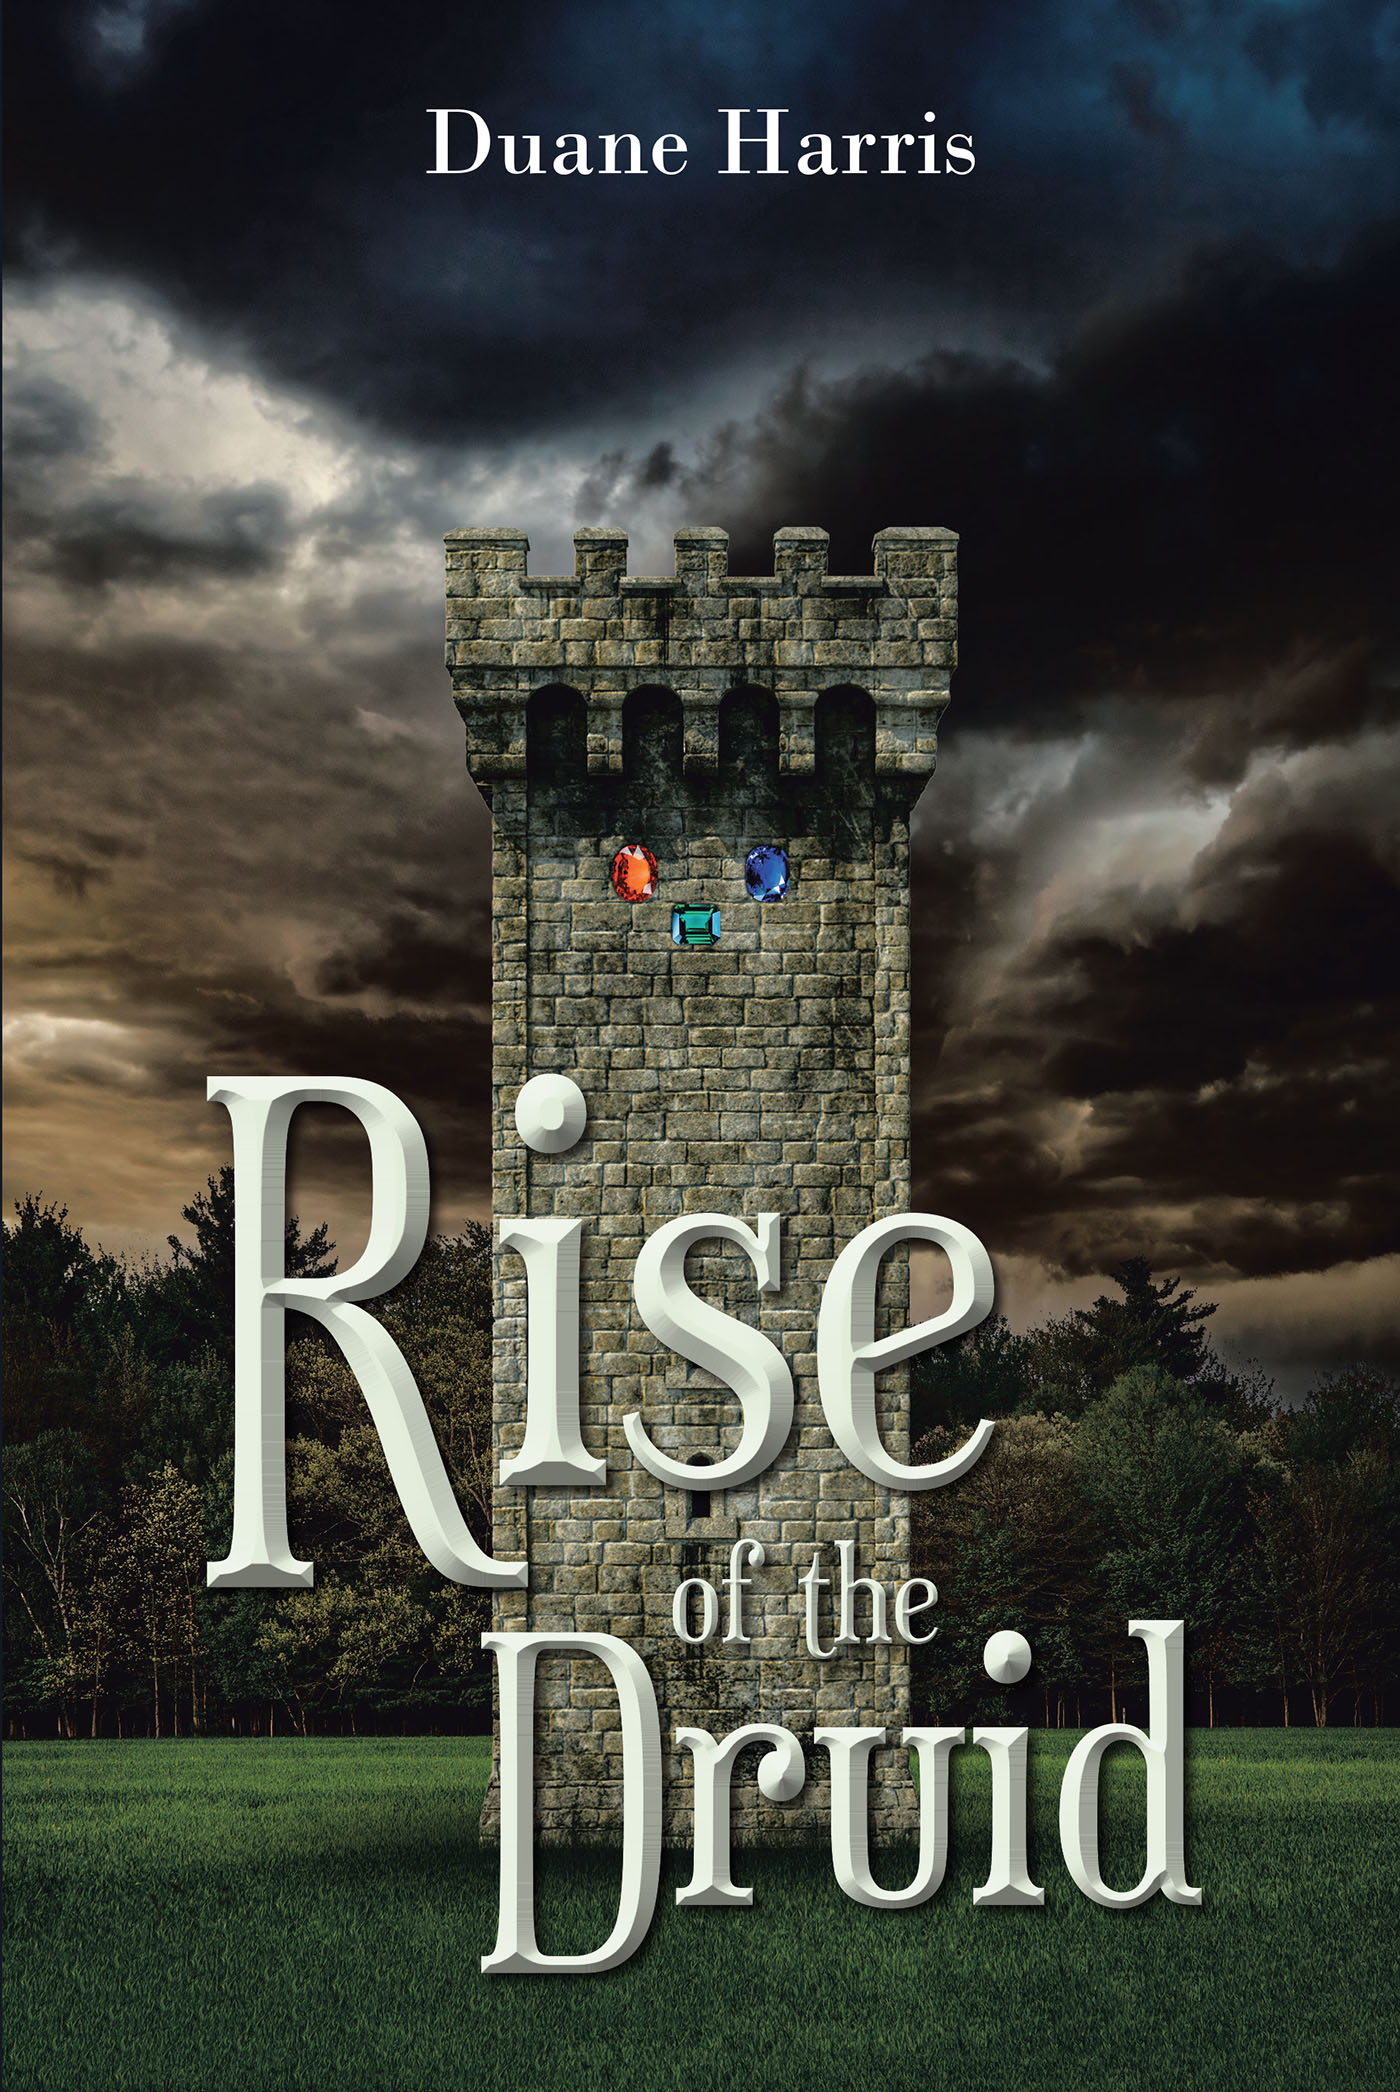 Duane Harris’s Newly Released "Rise of the Druid" is an Exciting Fantasy Adventure That Will Have Readers Racing to See What Awaits in the Lands of Al Garoth